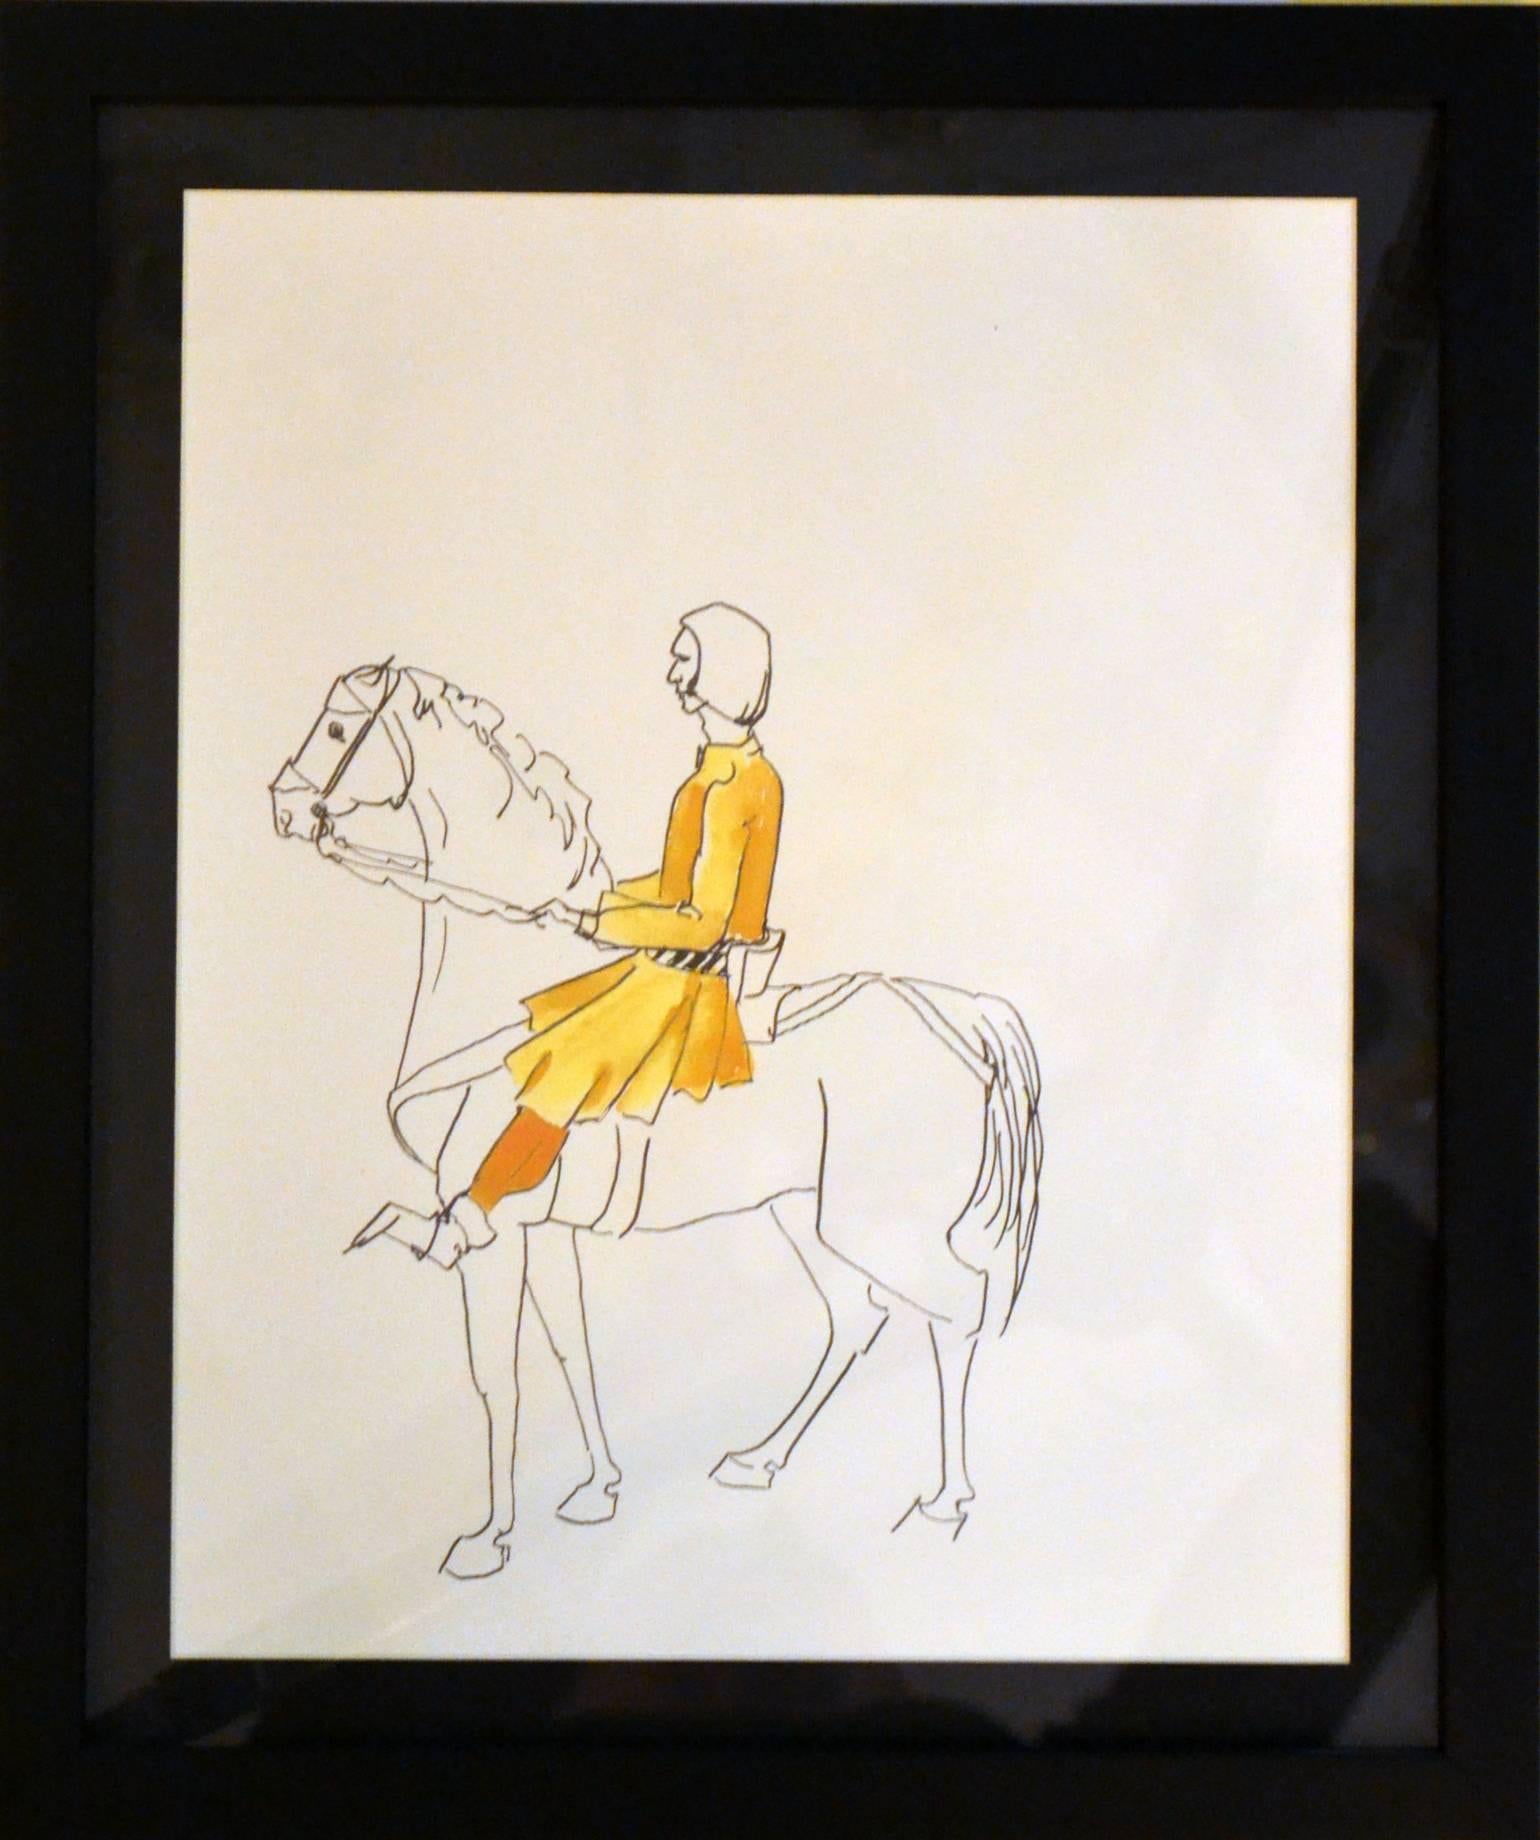 Four pencil drawings with partial watercoloring of characters from the medieval period traveling on horseback. The drawings have strong resemblance to the pilgrims who journey like in Geoffrey Chaucer's 'Canterbury Tales', 1387-1400.
They are newly